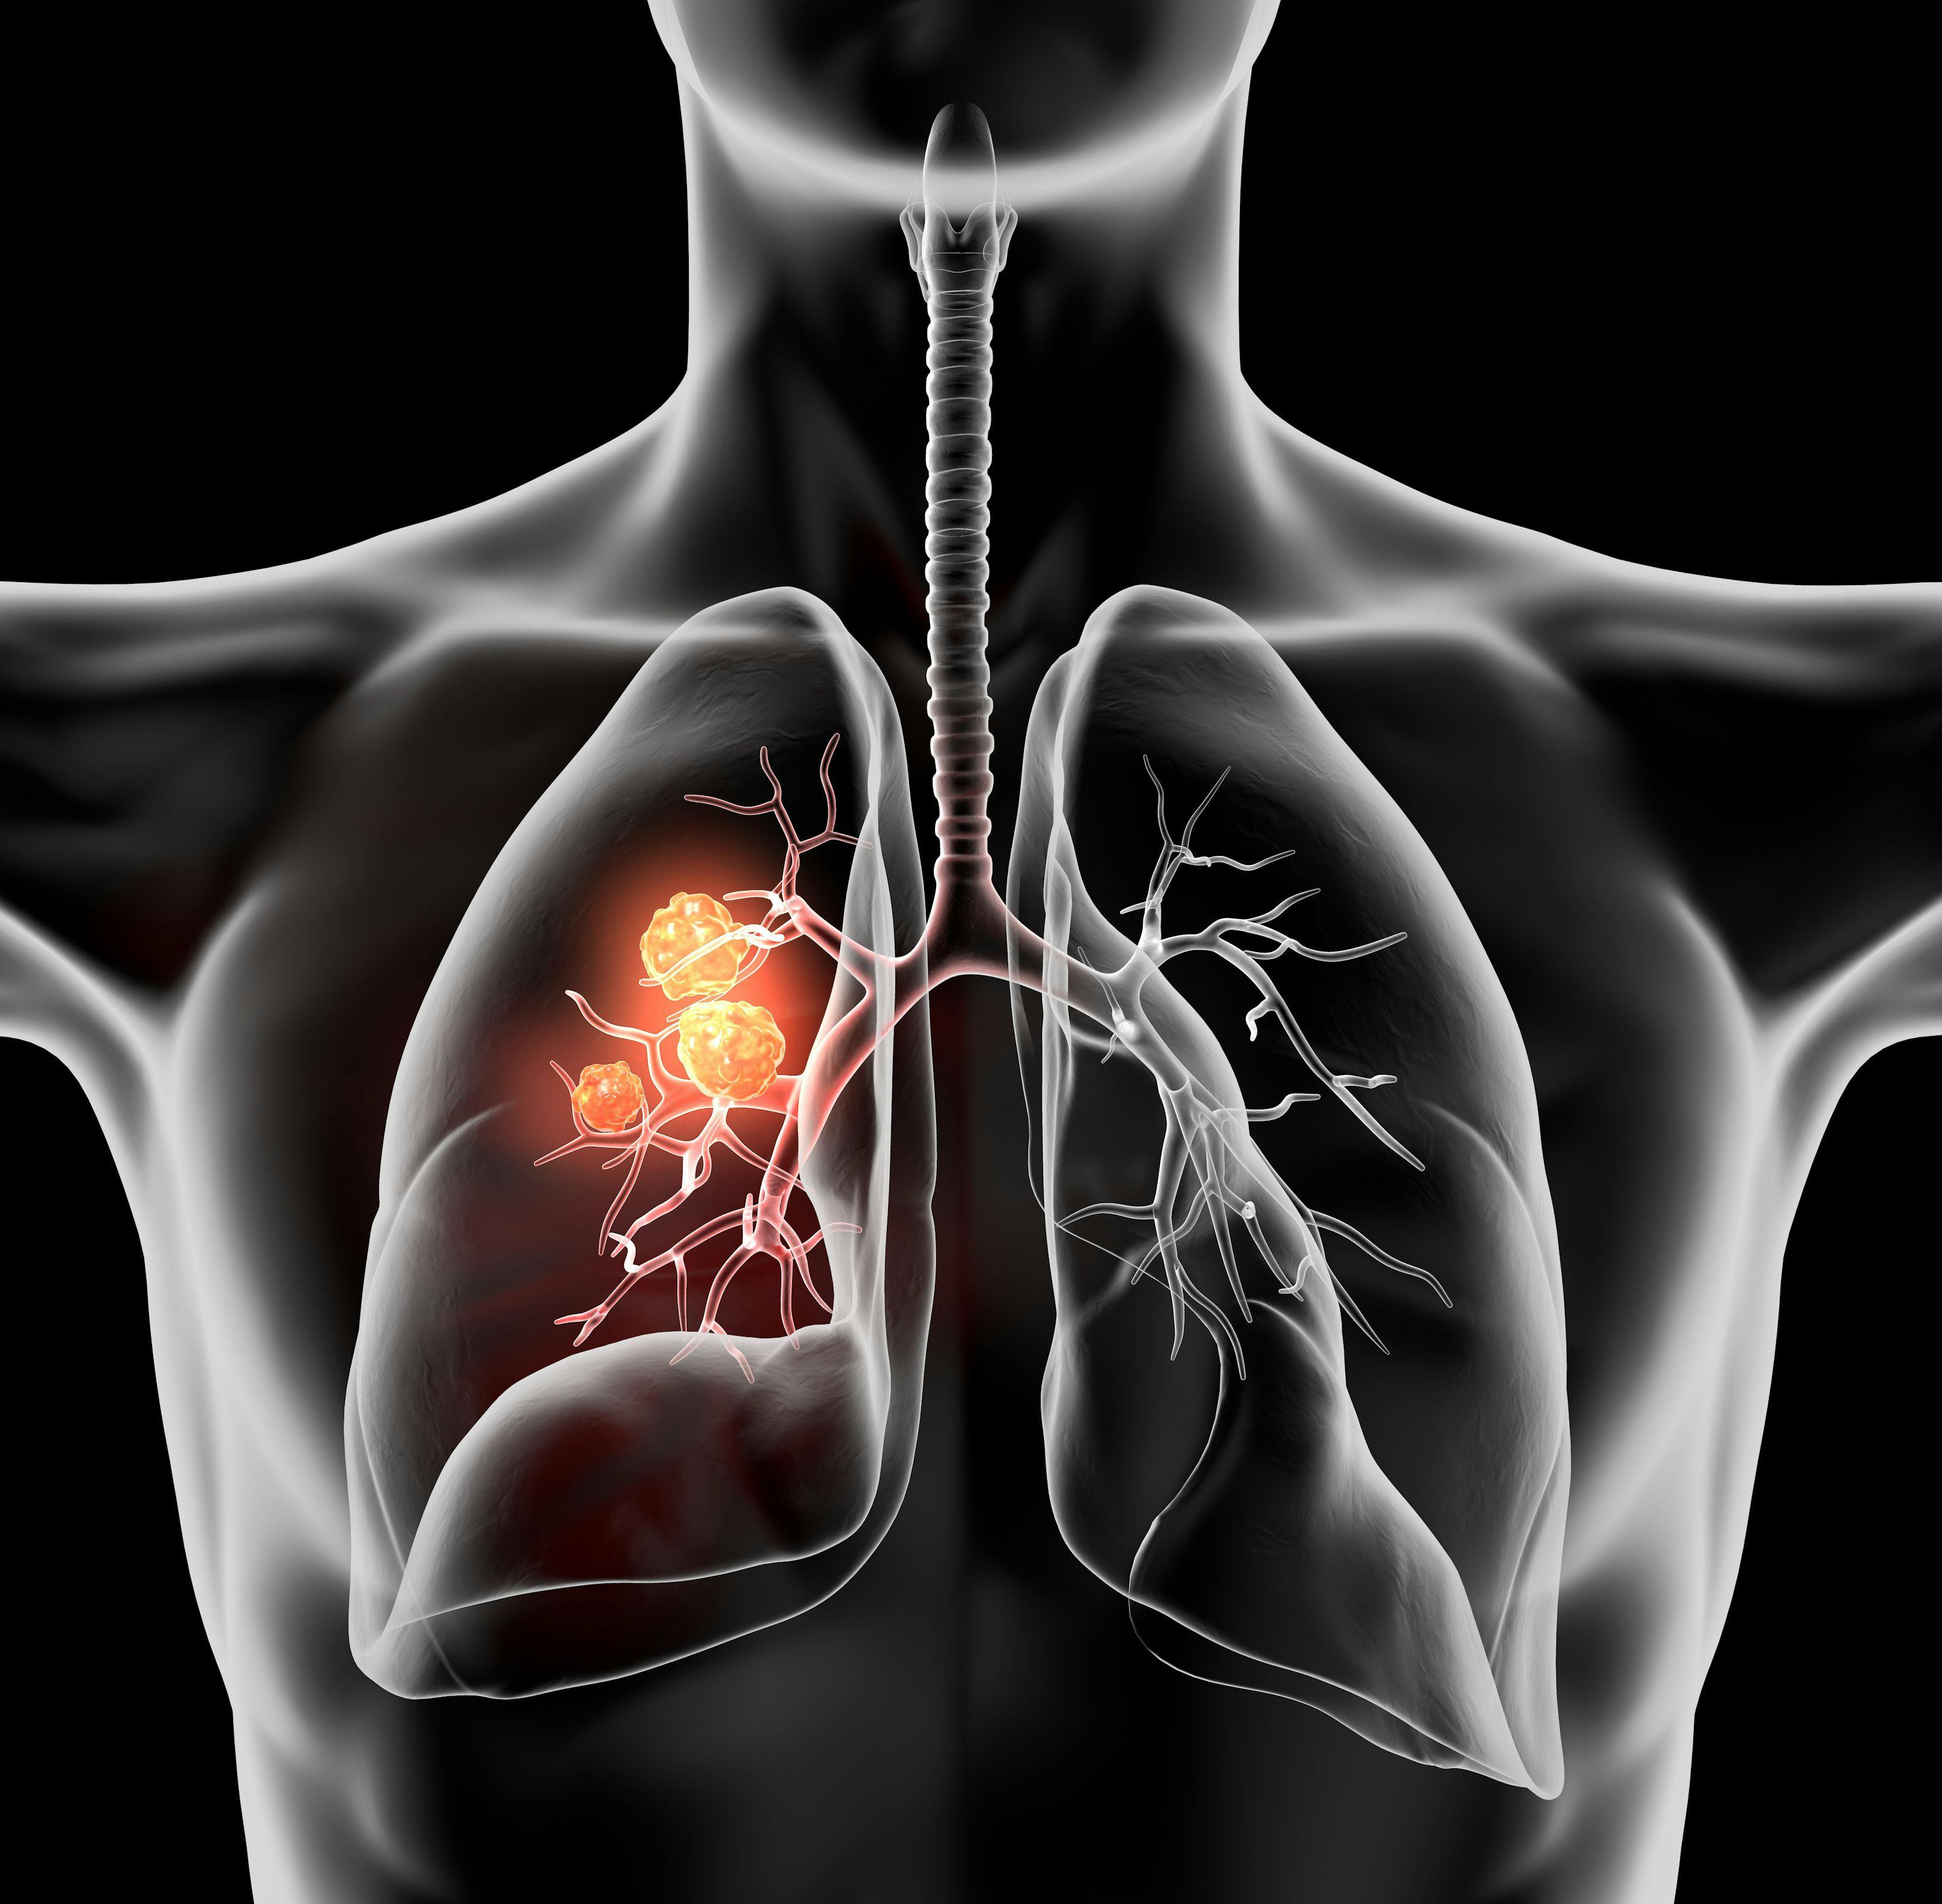 Illustration of a human lung with cancer